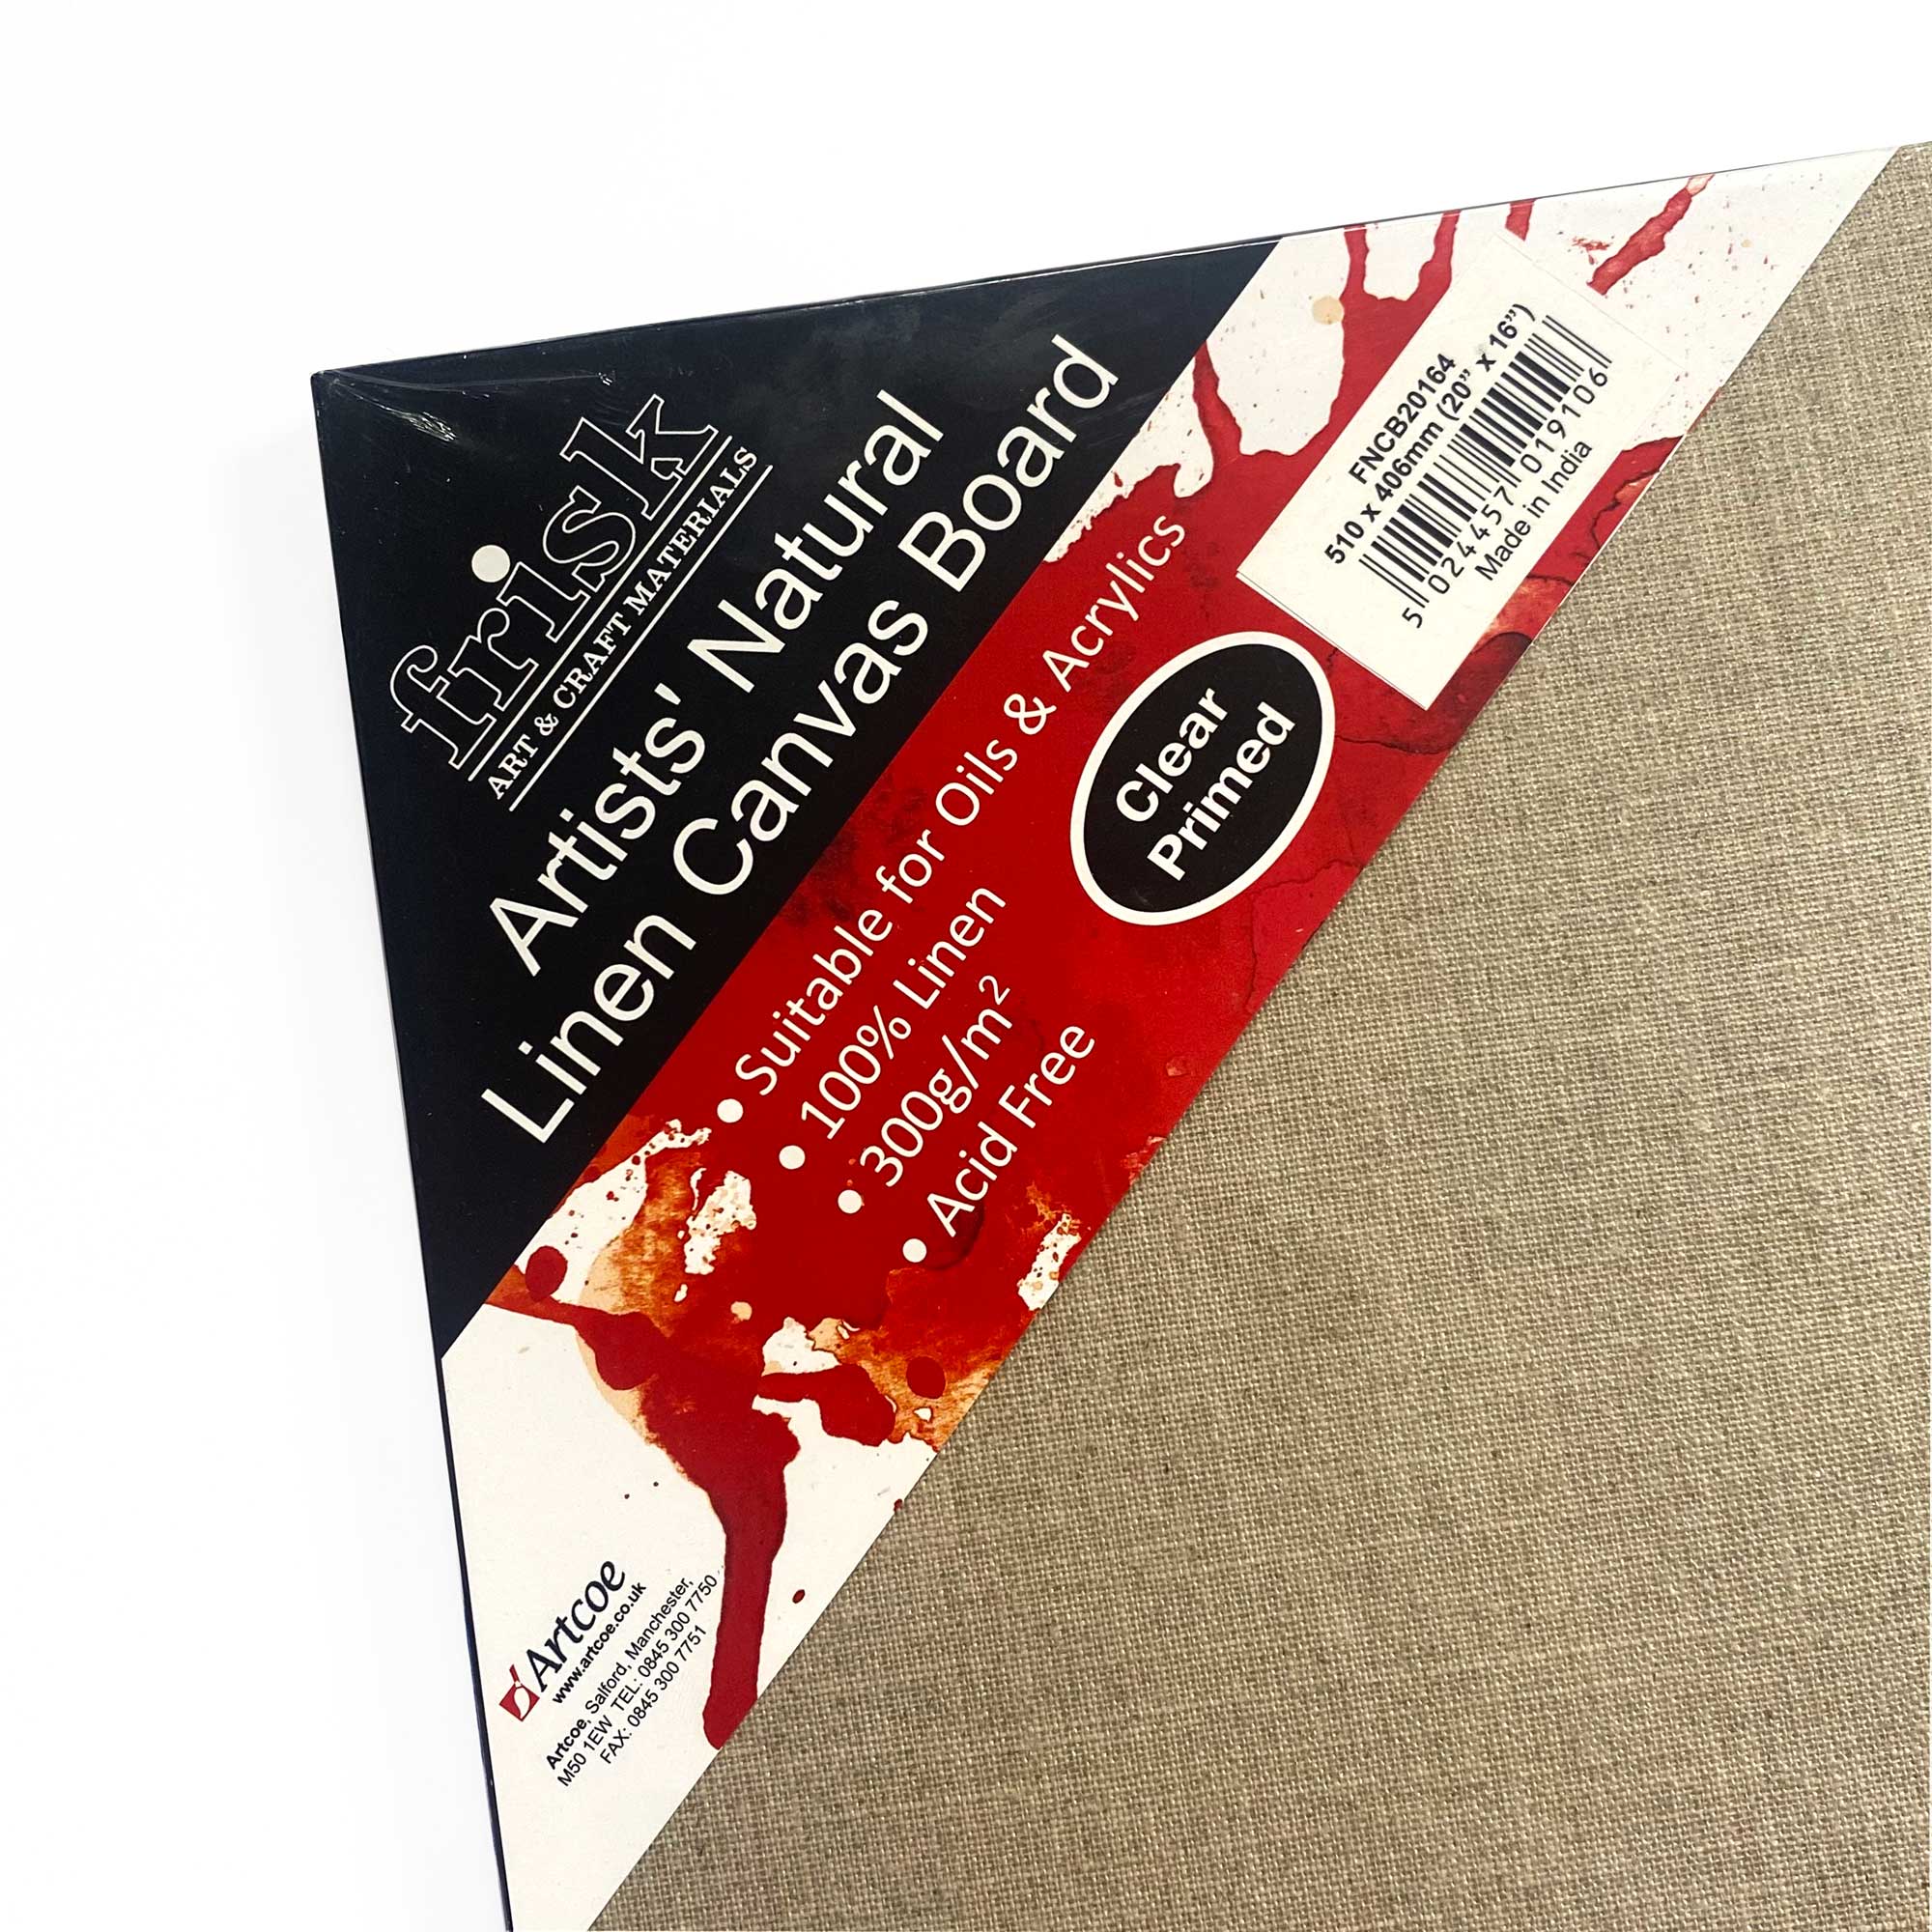 Loxley Linen Clear Gesso Canvas